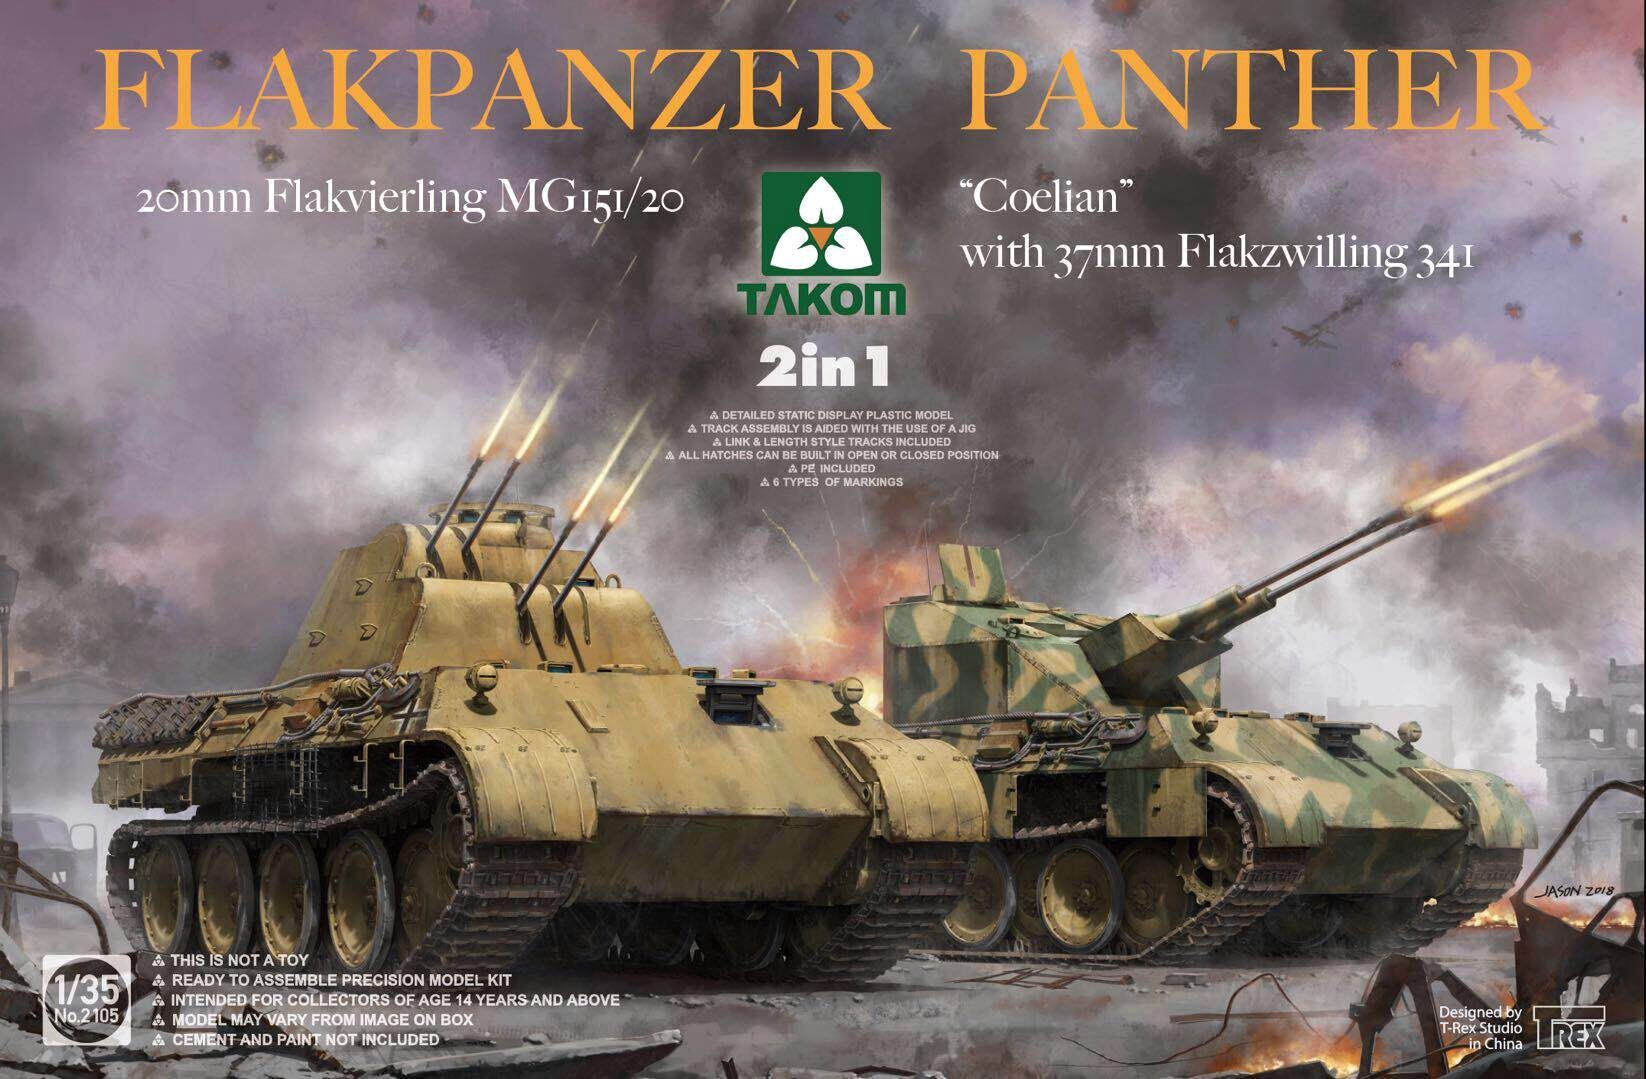 Flakpanzer Panther - 20mm Flakvierling & "Coelian" (2 in 1)